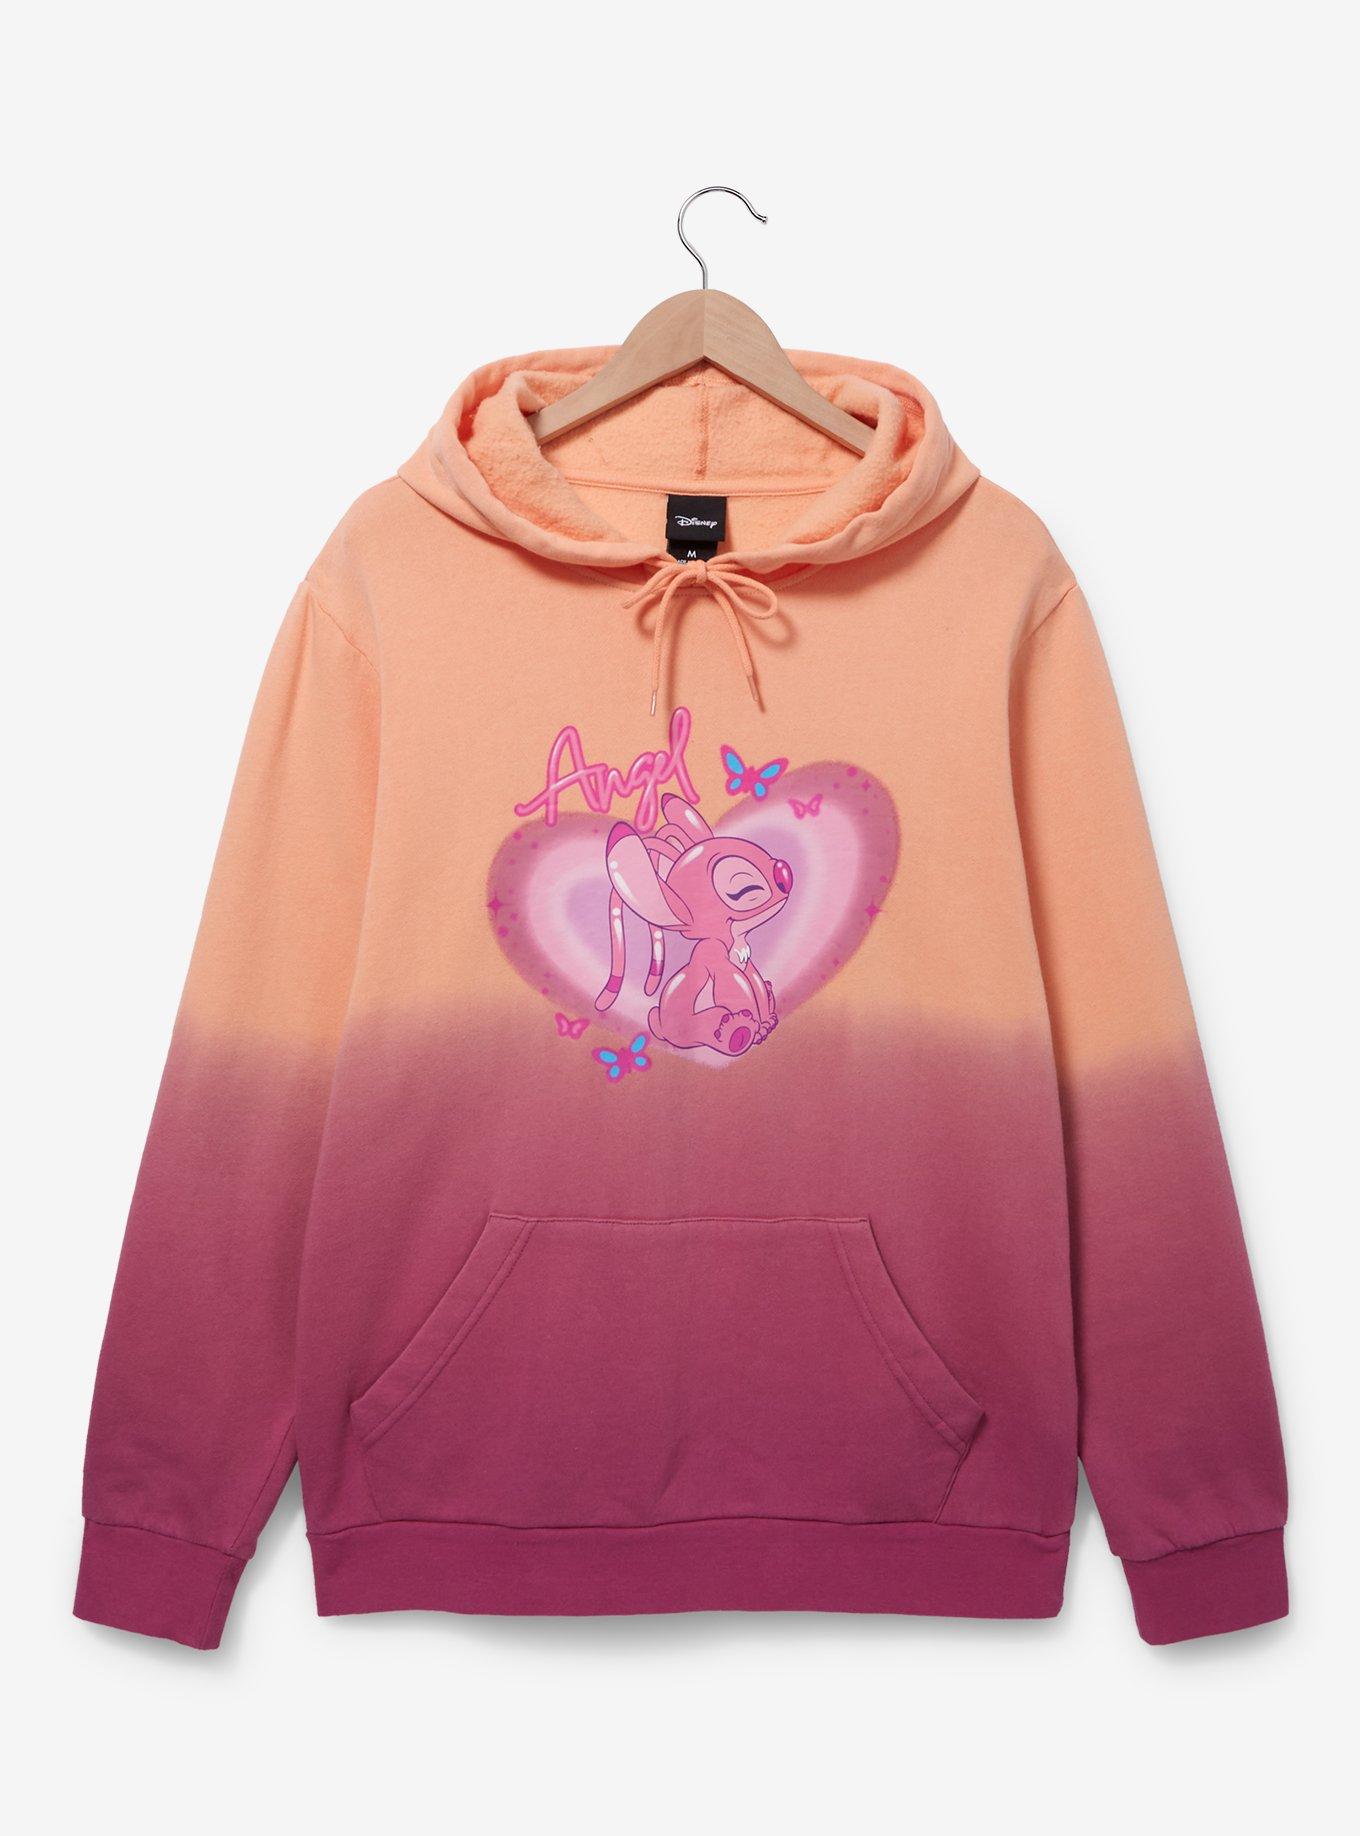 Men's Lilo & Stitch Angel Cute & Fluffy Pull Over Hoodie